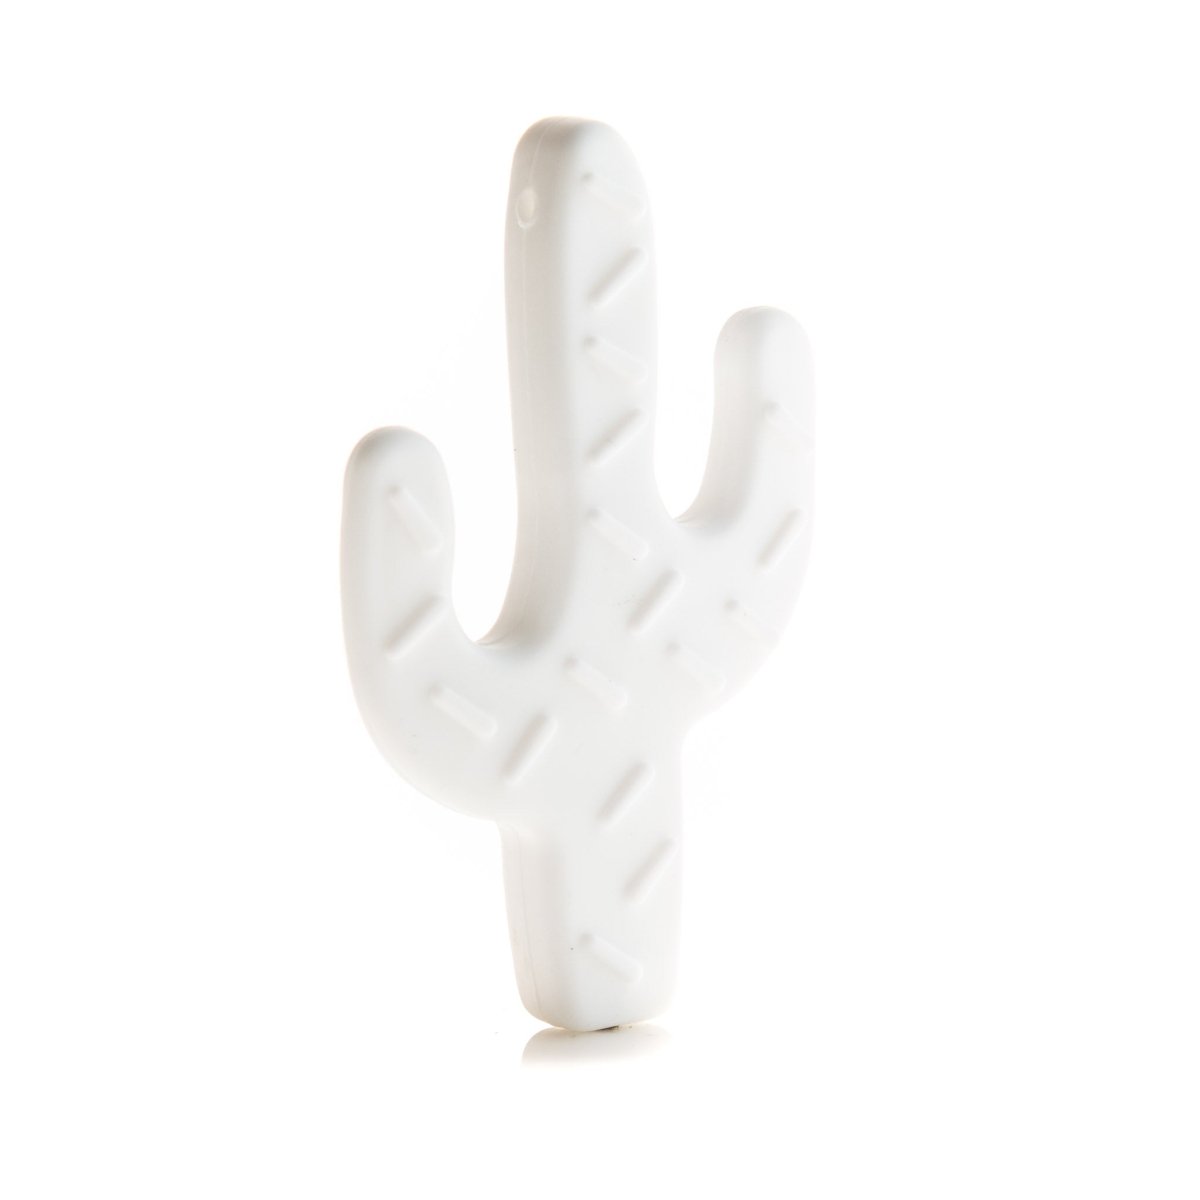 Silicone Teethers and Pendants Cactus White from Cara & Co Craft Supply